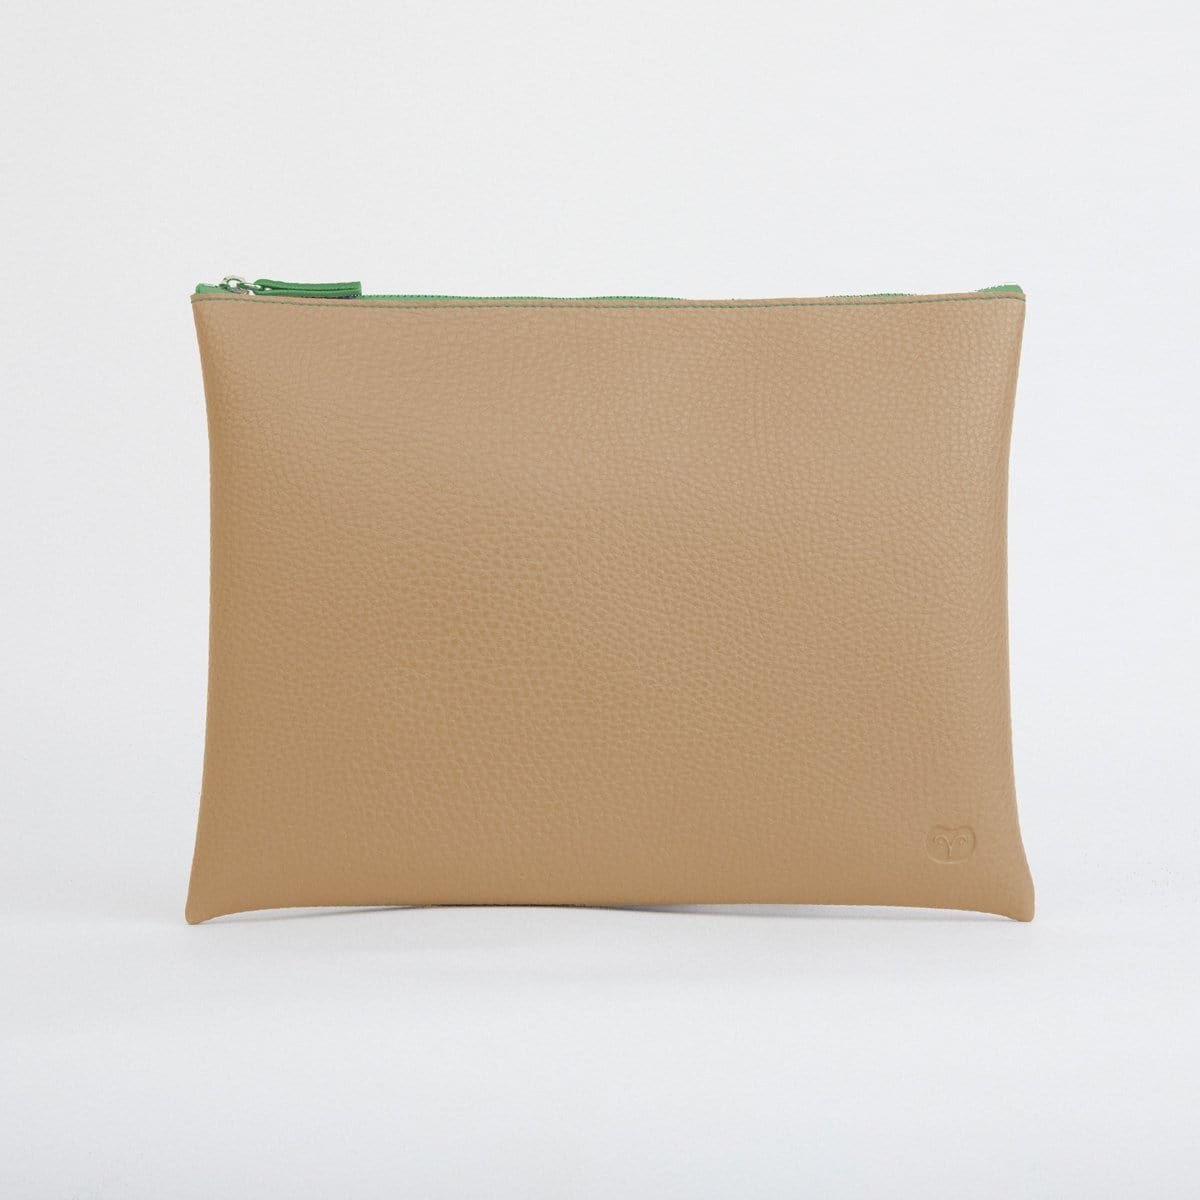 Tawny Large Pouch - vegan friendly gifts and accessories by goodeehoo